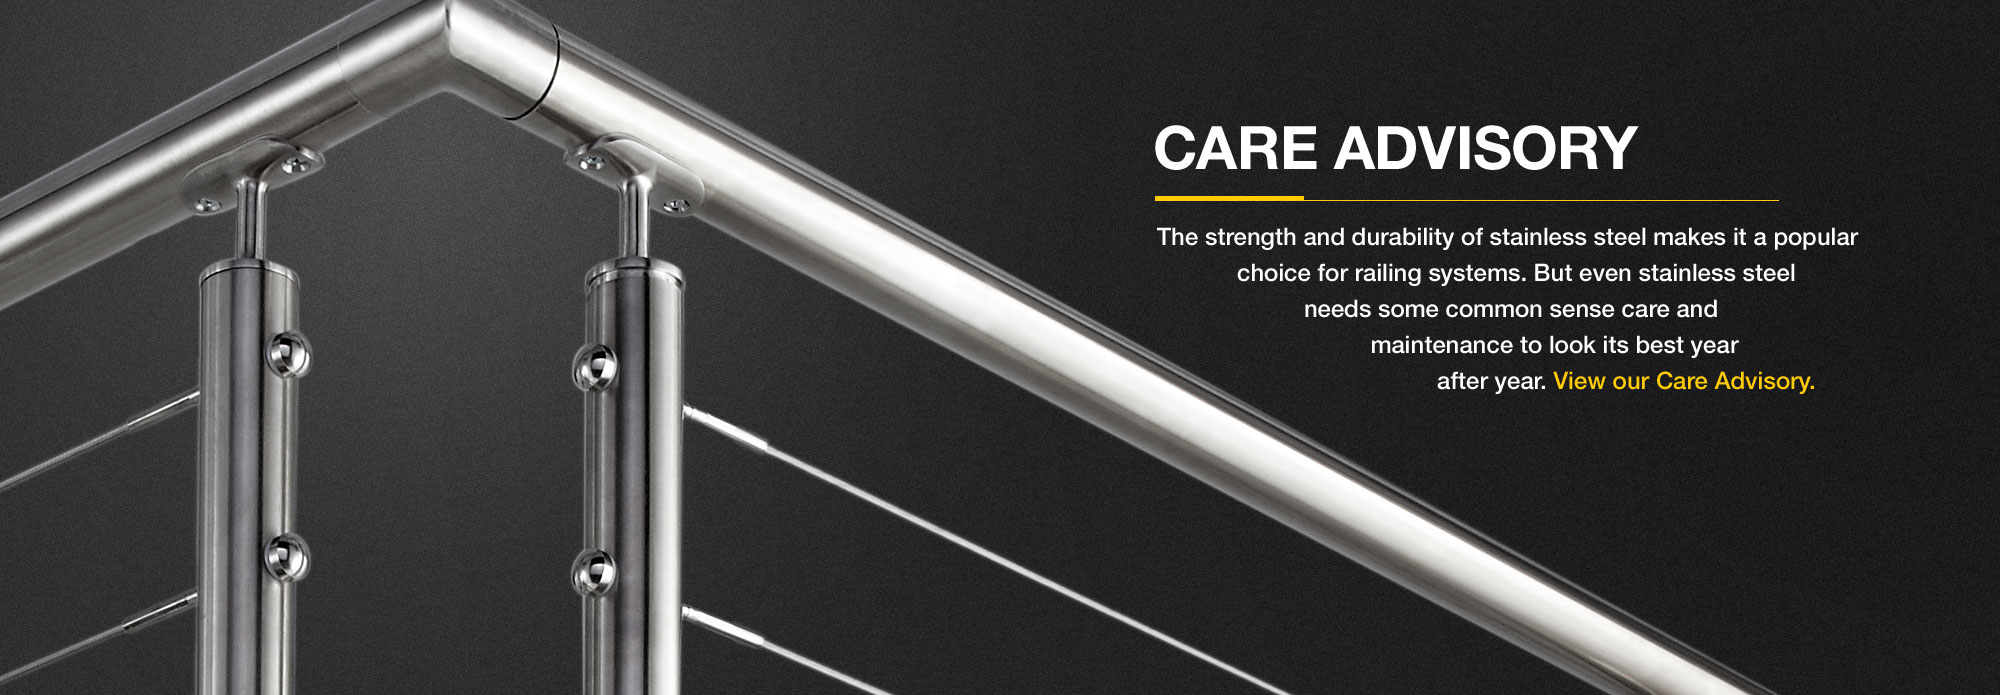 Stainless Steel Care Advisory